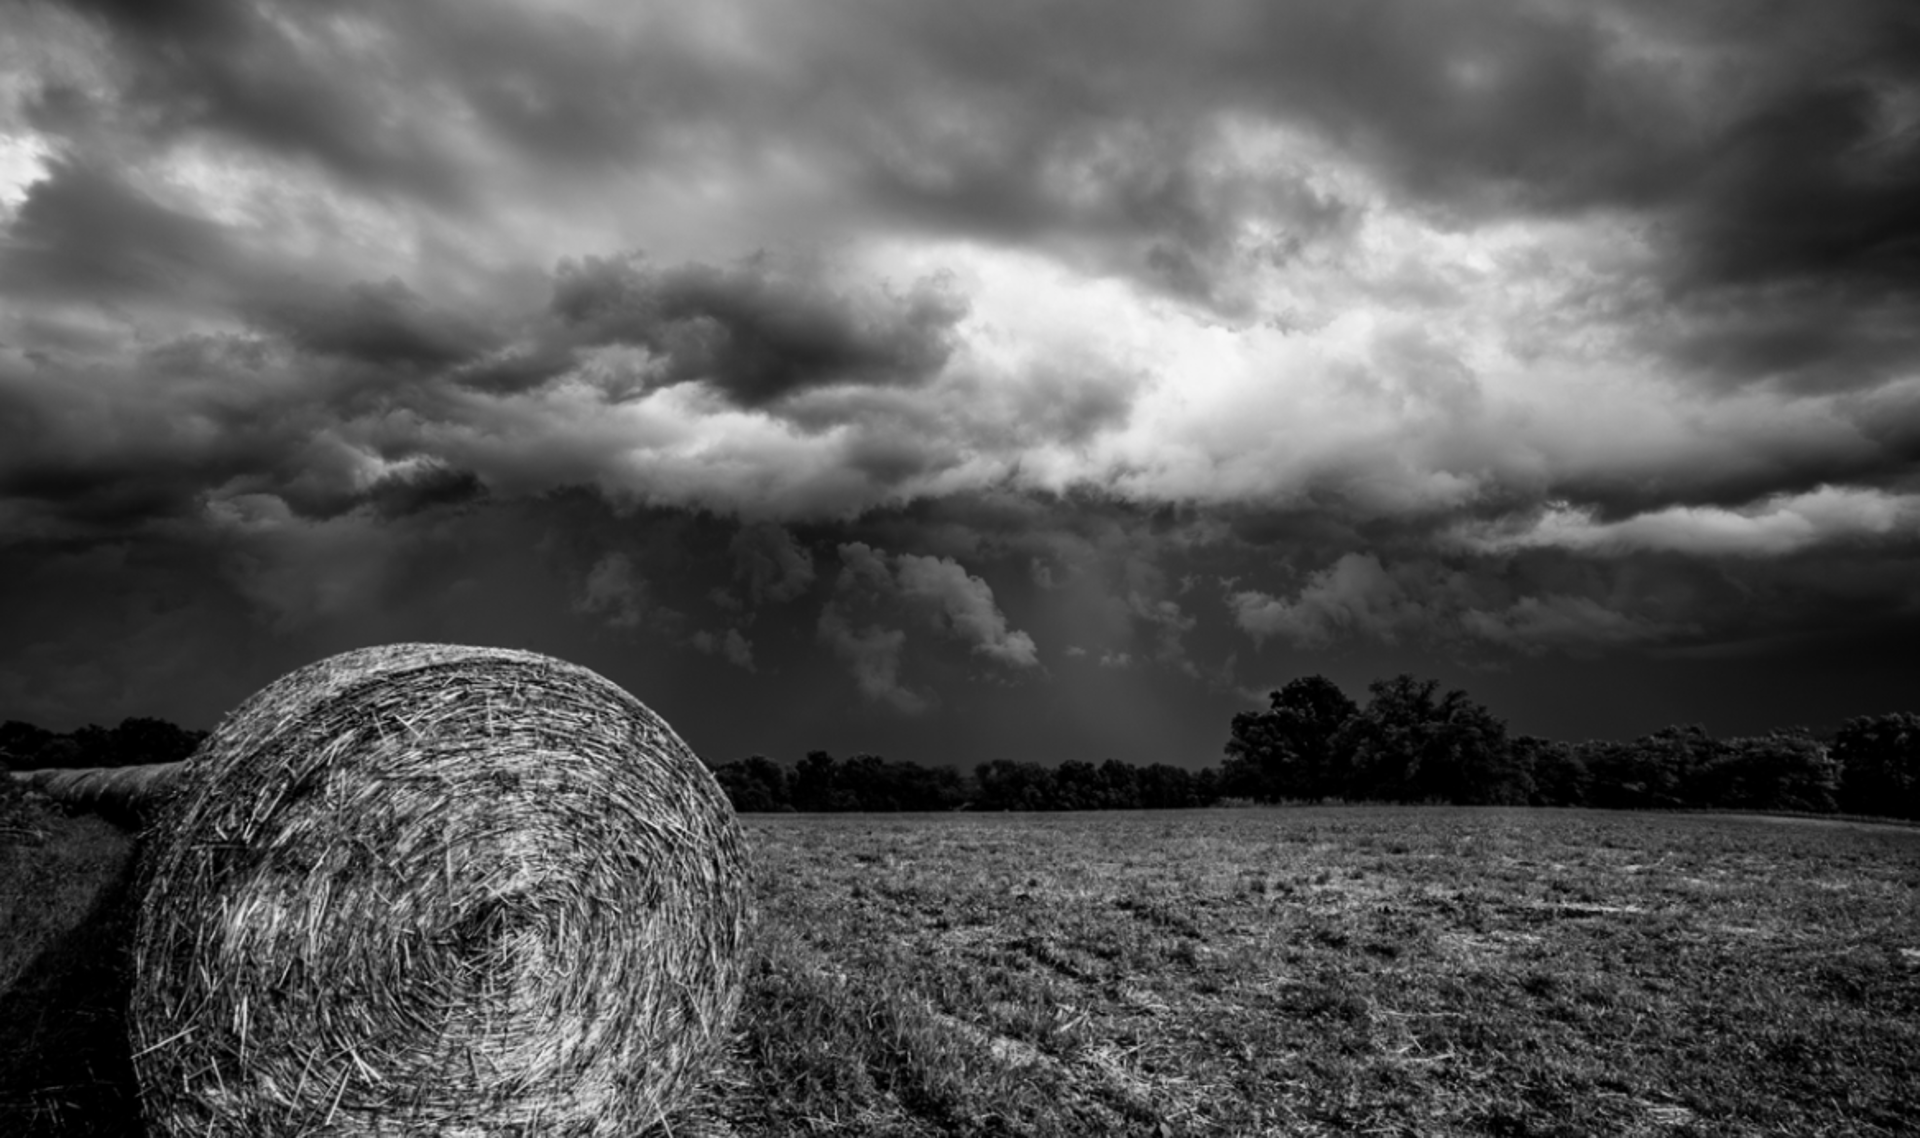 Hay Bale Storm by Justin Rogers